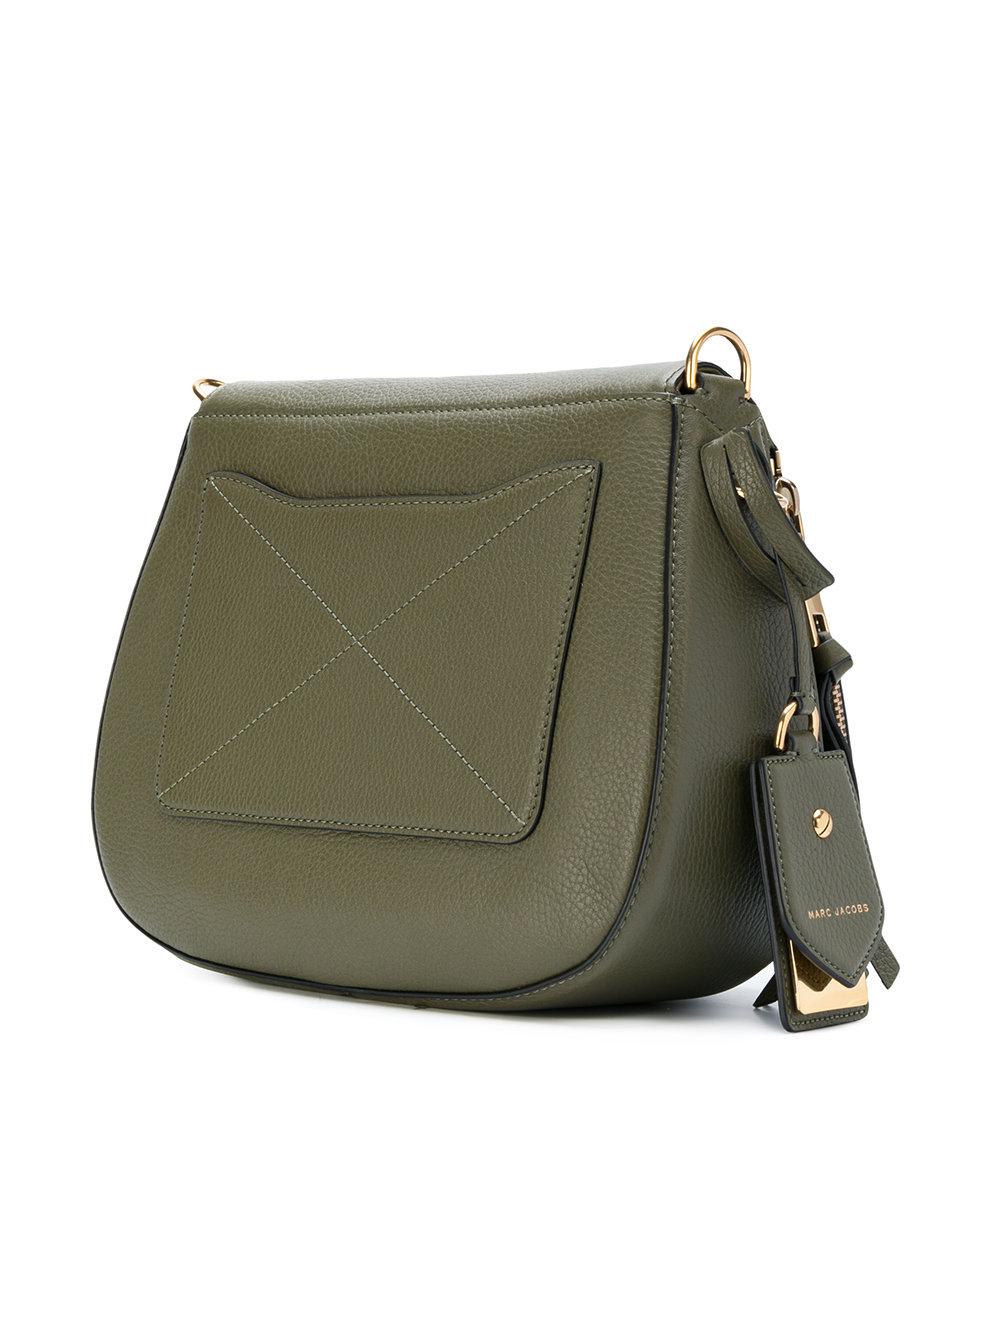 Marc Jacobs Leather Recruit Nomad Saddle Bag in Green | Lyst